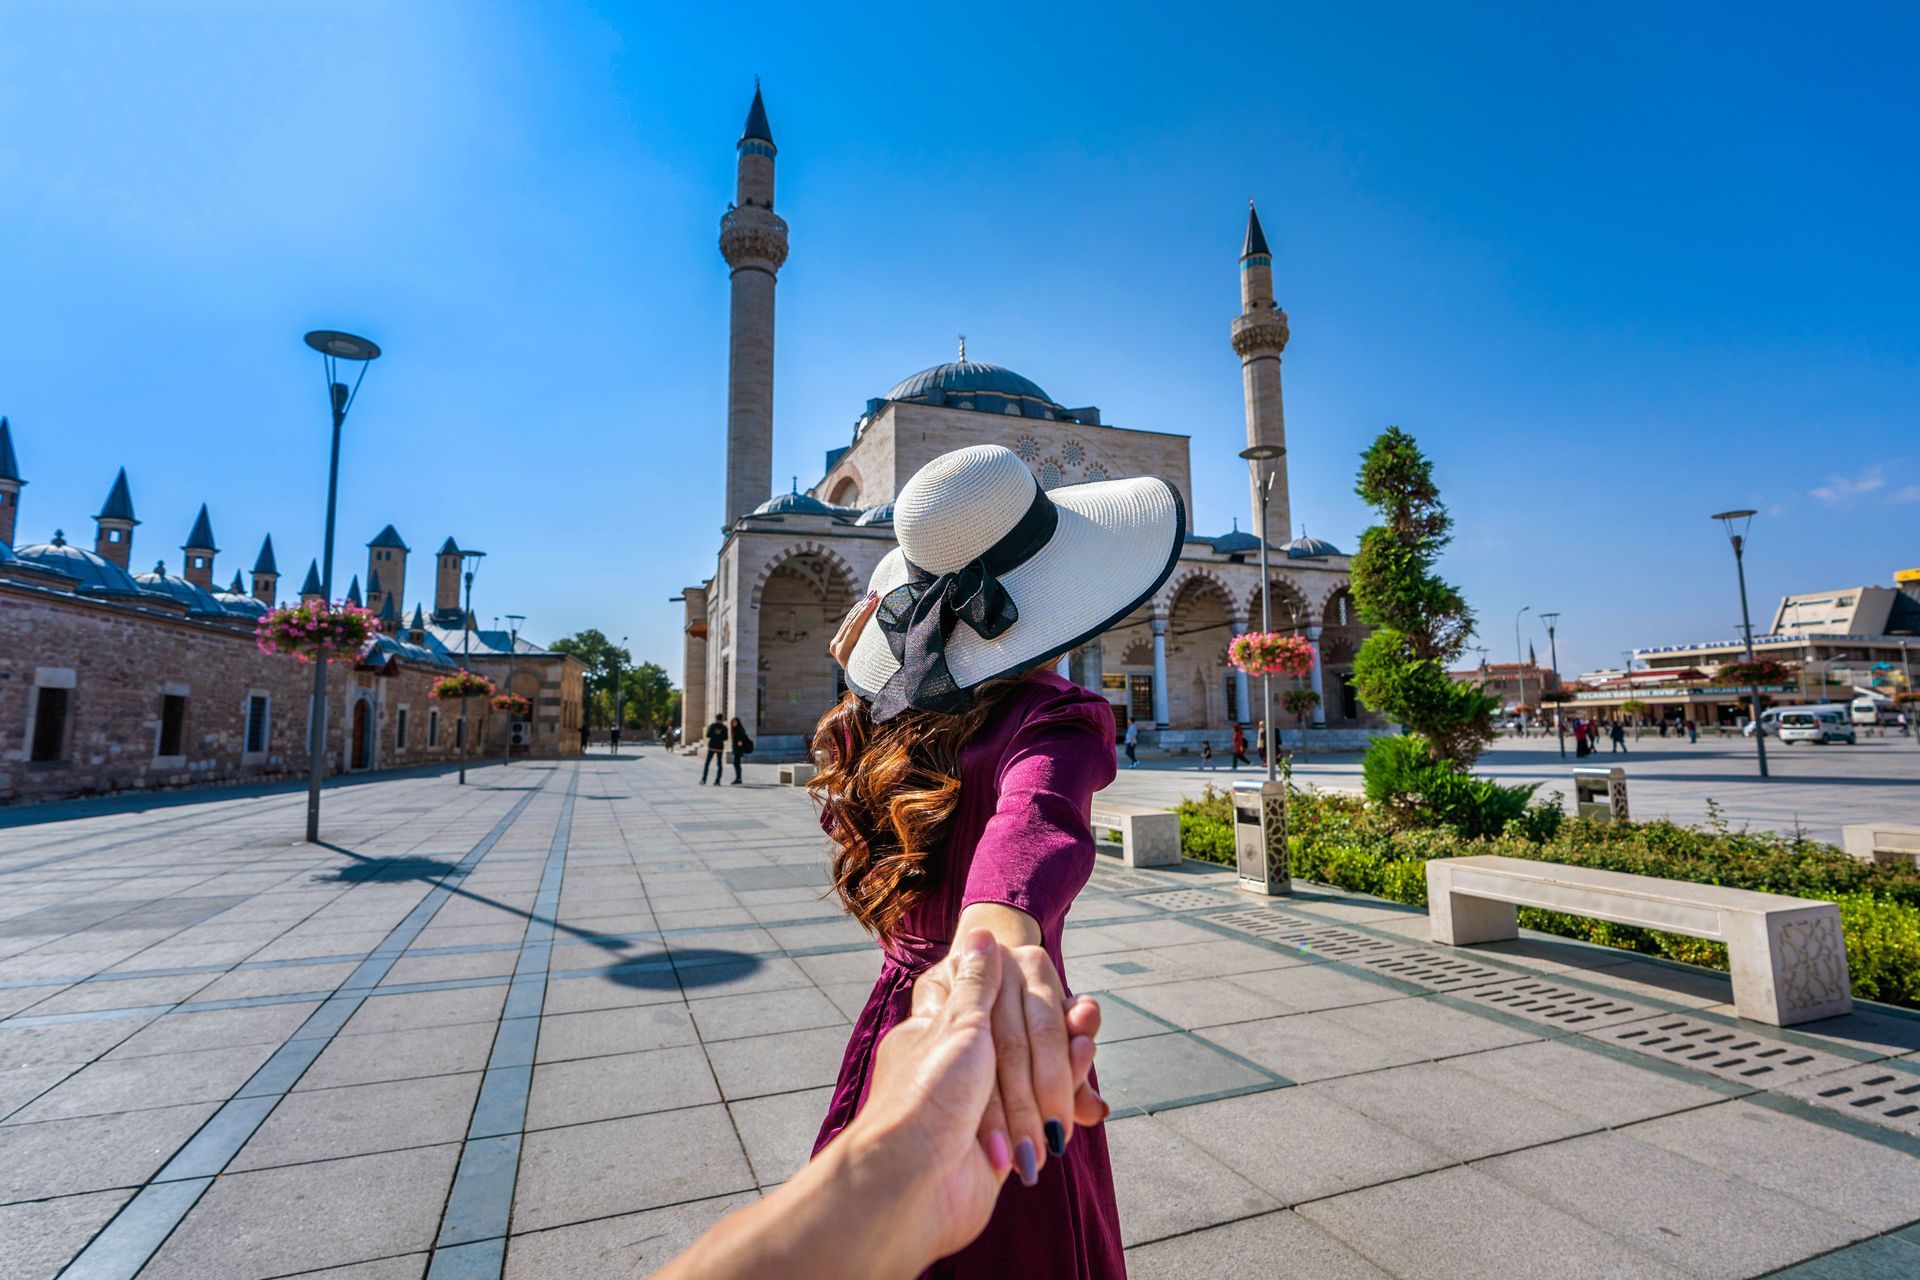 A woman in a hat is holding a man 's hand in front of a mosque.